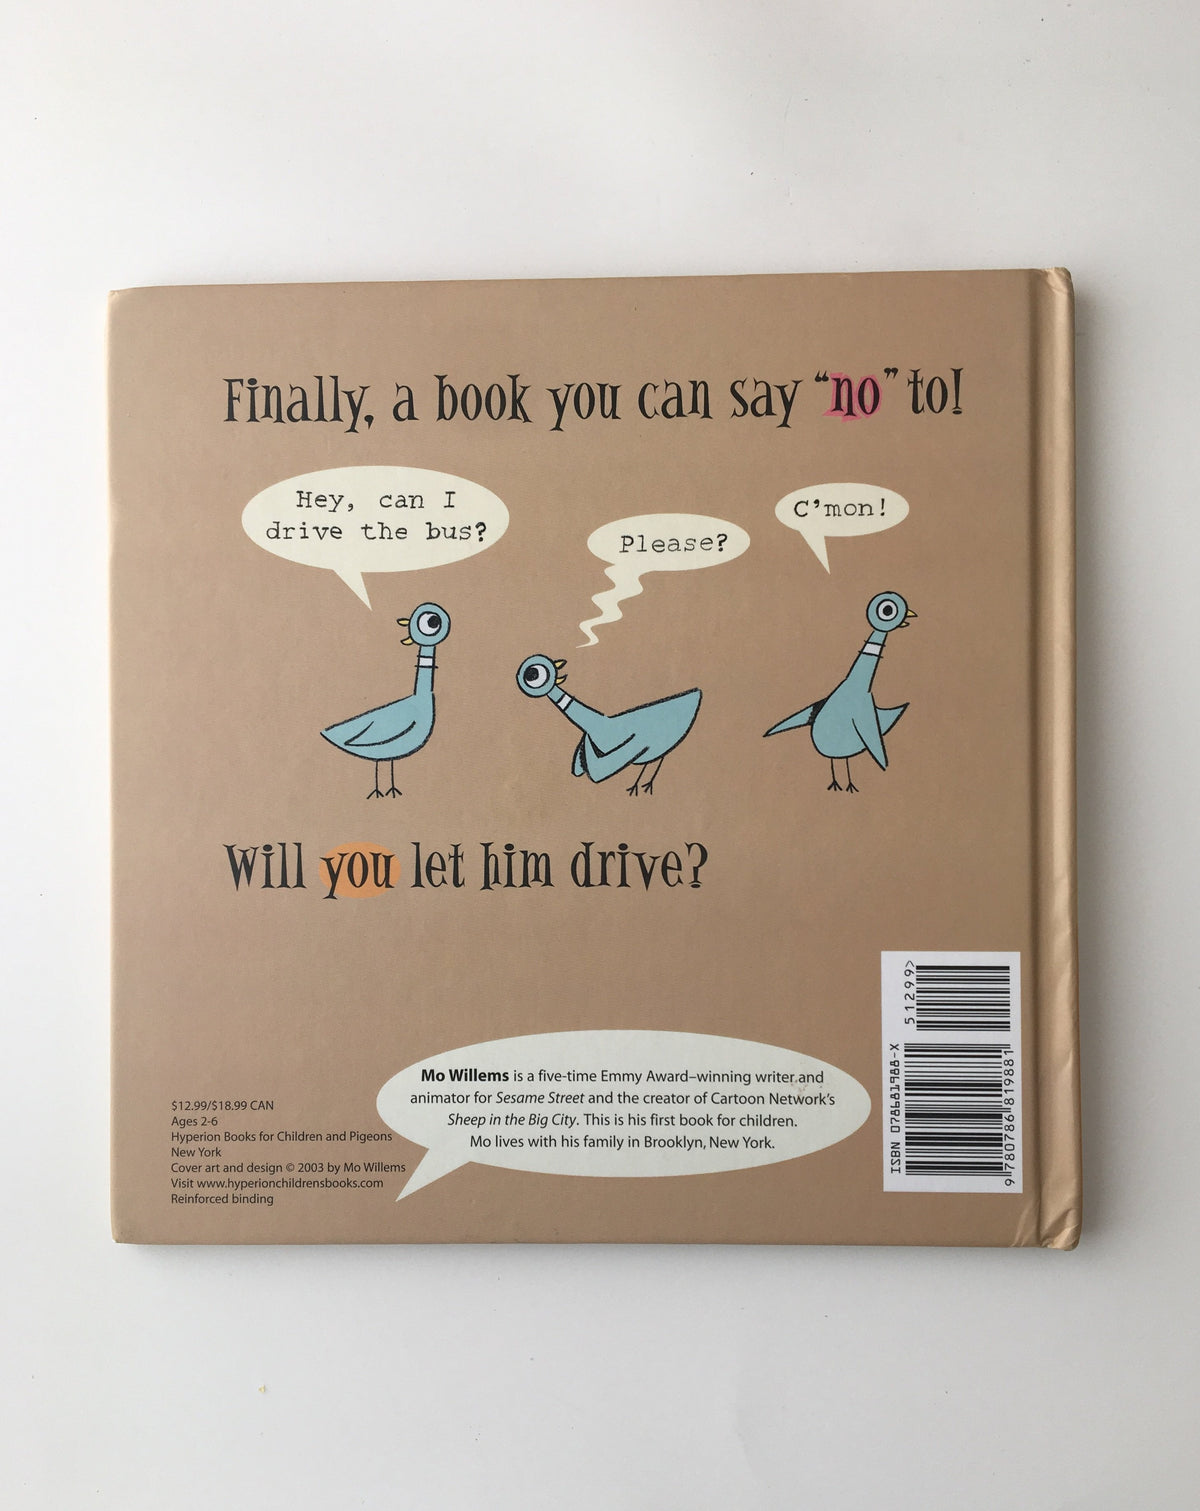 Don&#39;t Let the Pigeon Drive the bus by Mo Willems